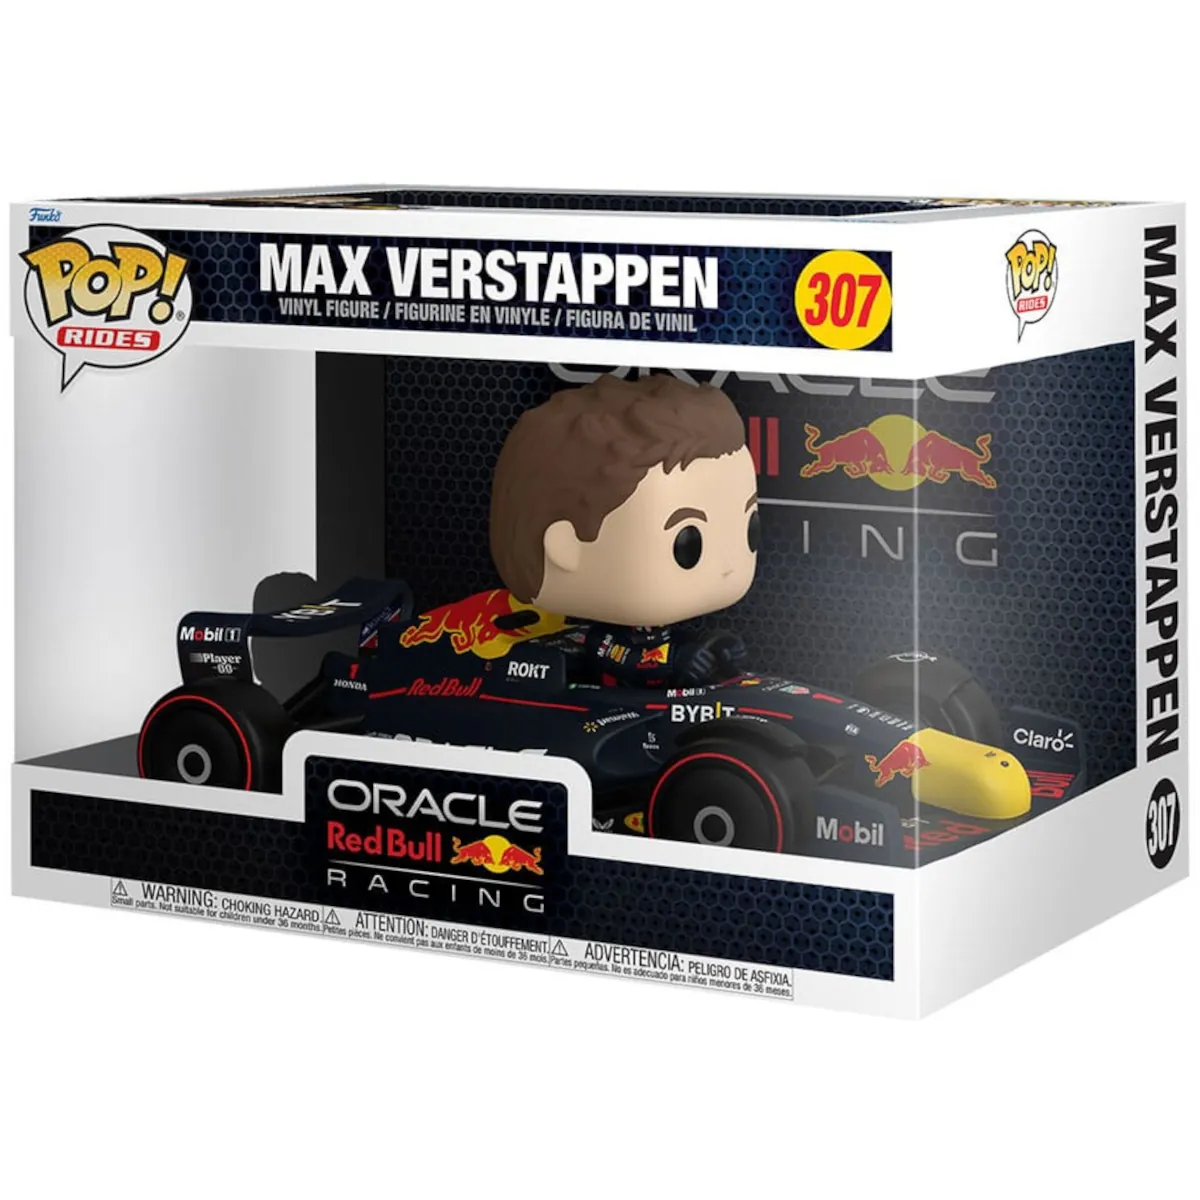 Funko Pop Rides Super Deluxe Oracle Red Bull Racing Max Verstappen Car Collectable Vinyl Figure Box Front